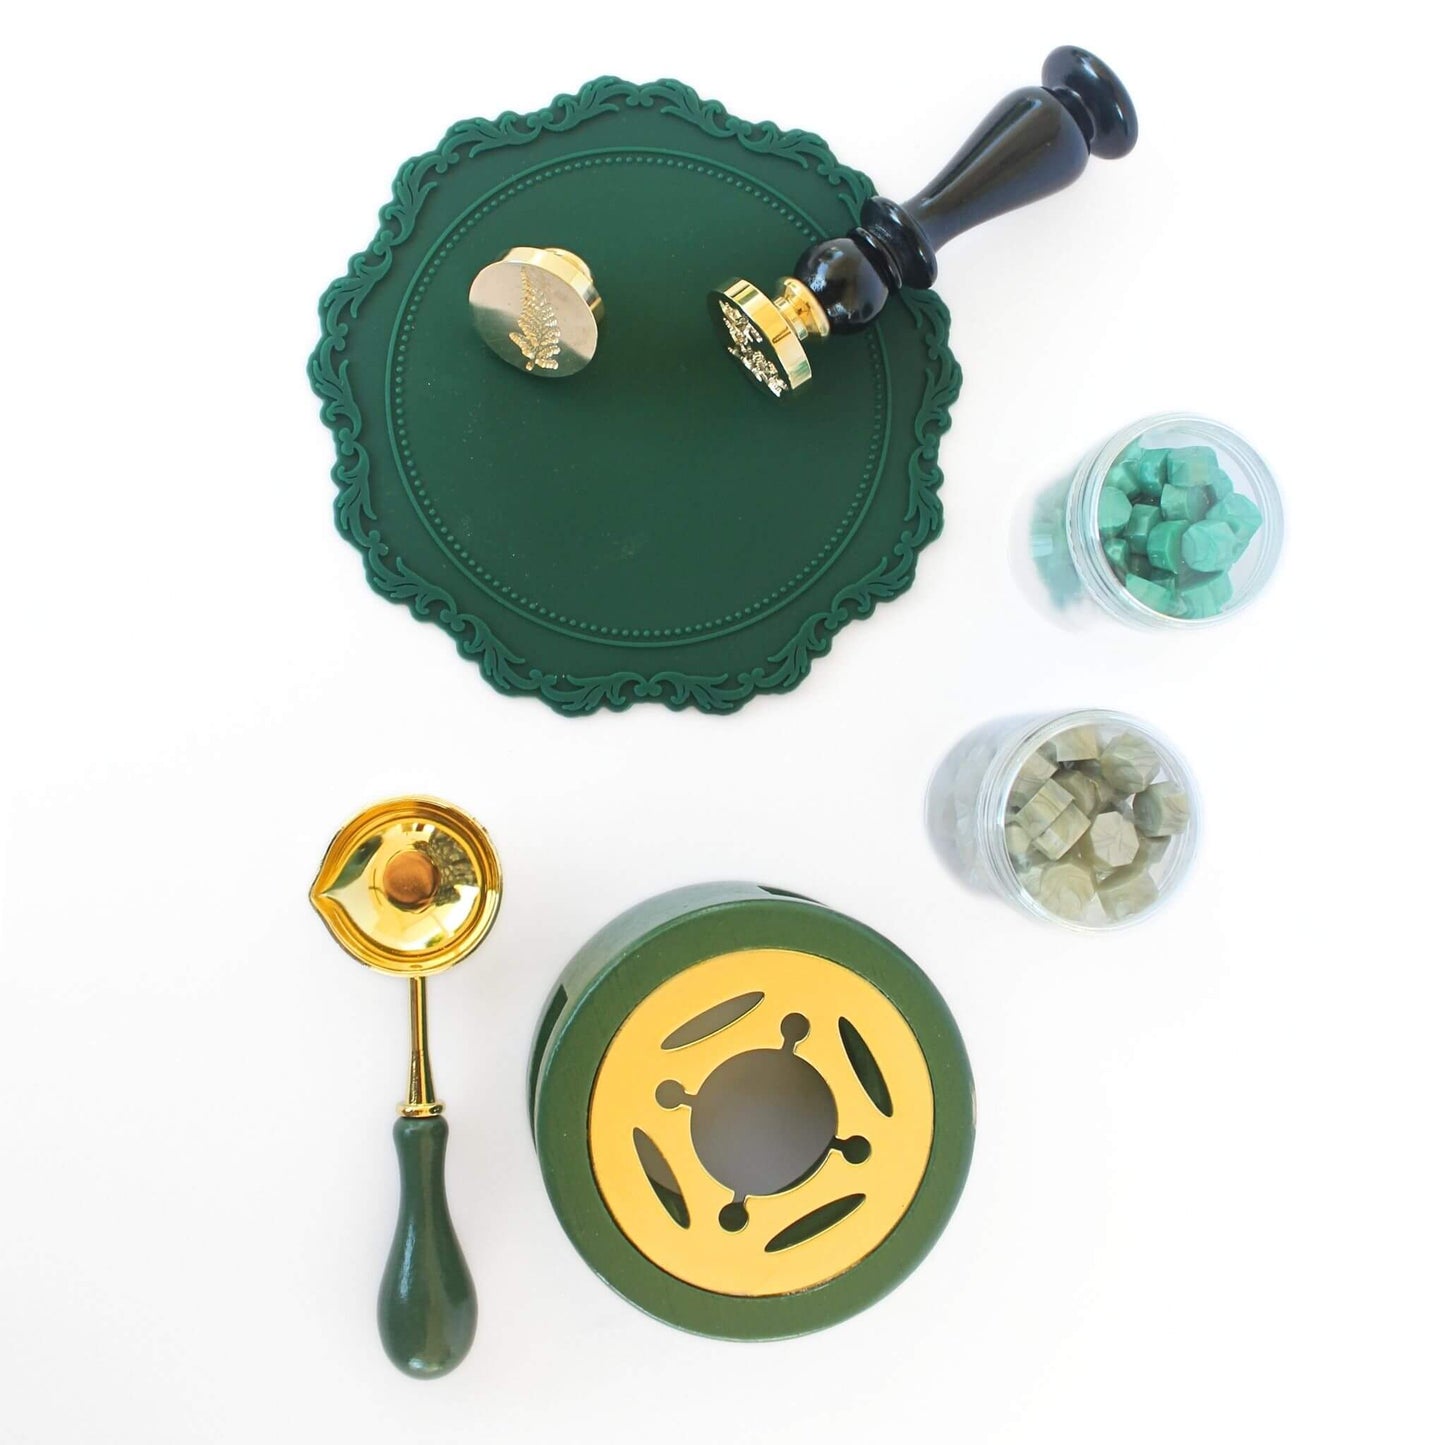 green themed wax seal kit with wax seals featuring botanical engravings and green wax sealing accessories